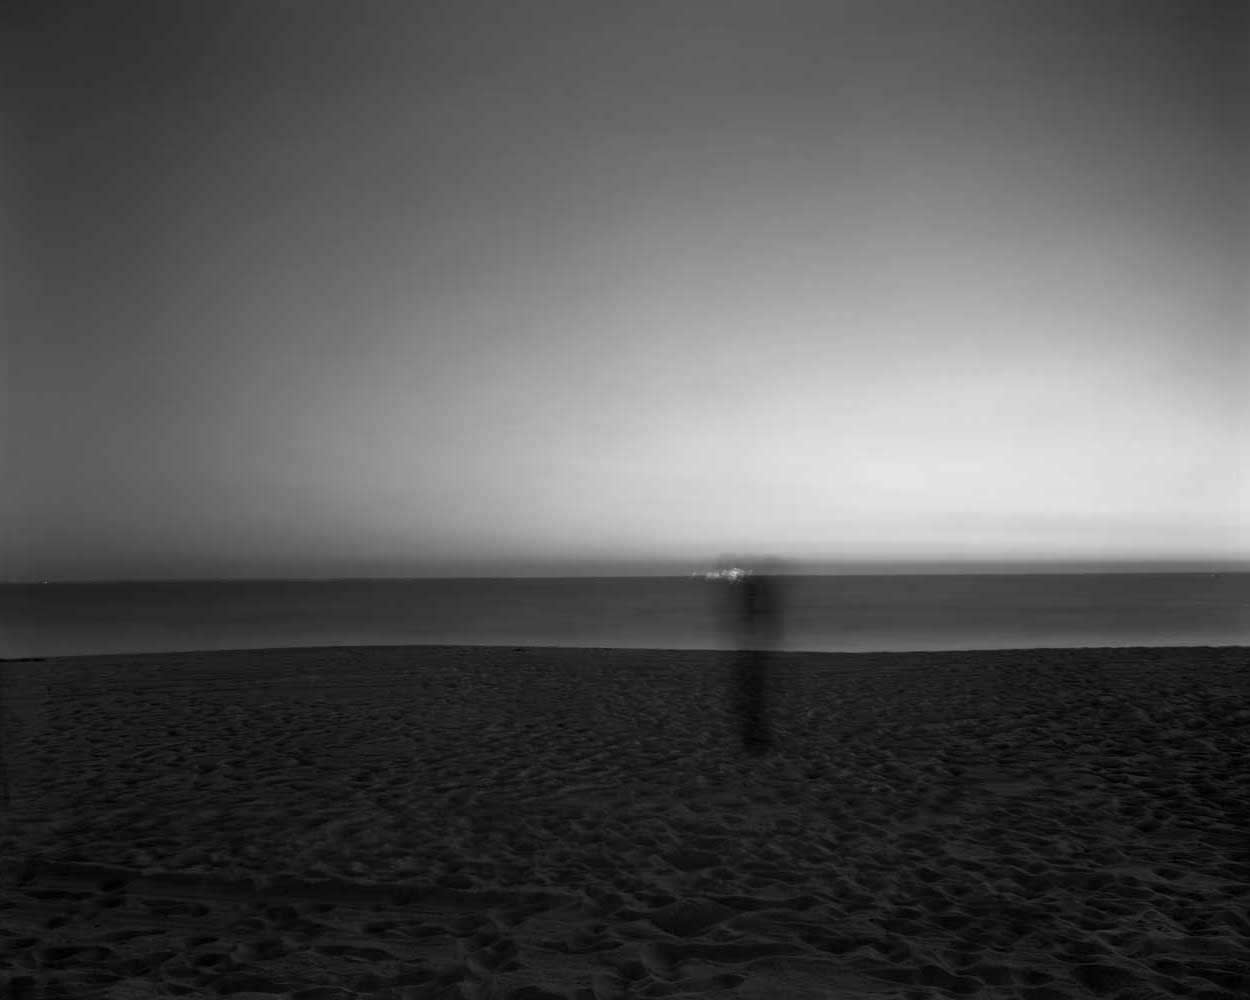 Cell phone on Venice Beach, from the Screen Lives series by Matthew Pillsbury